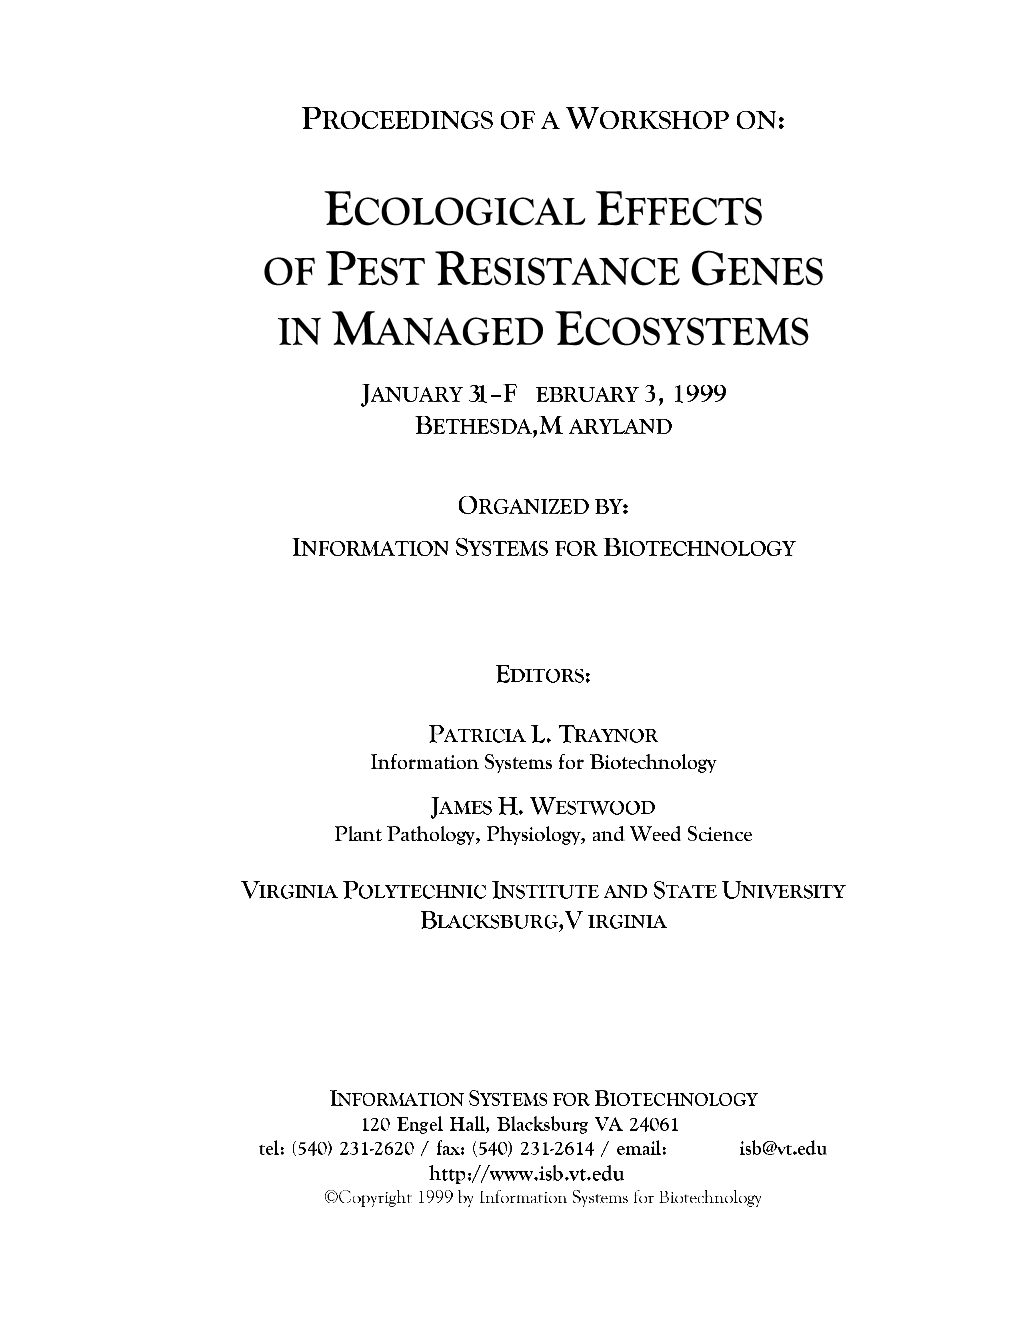 Workshop on Ecological Effects of Pest Resistance Genes in Managed Ecosystems,” in Bethesda, MD, January 31 – February 3, 1999